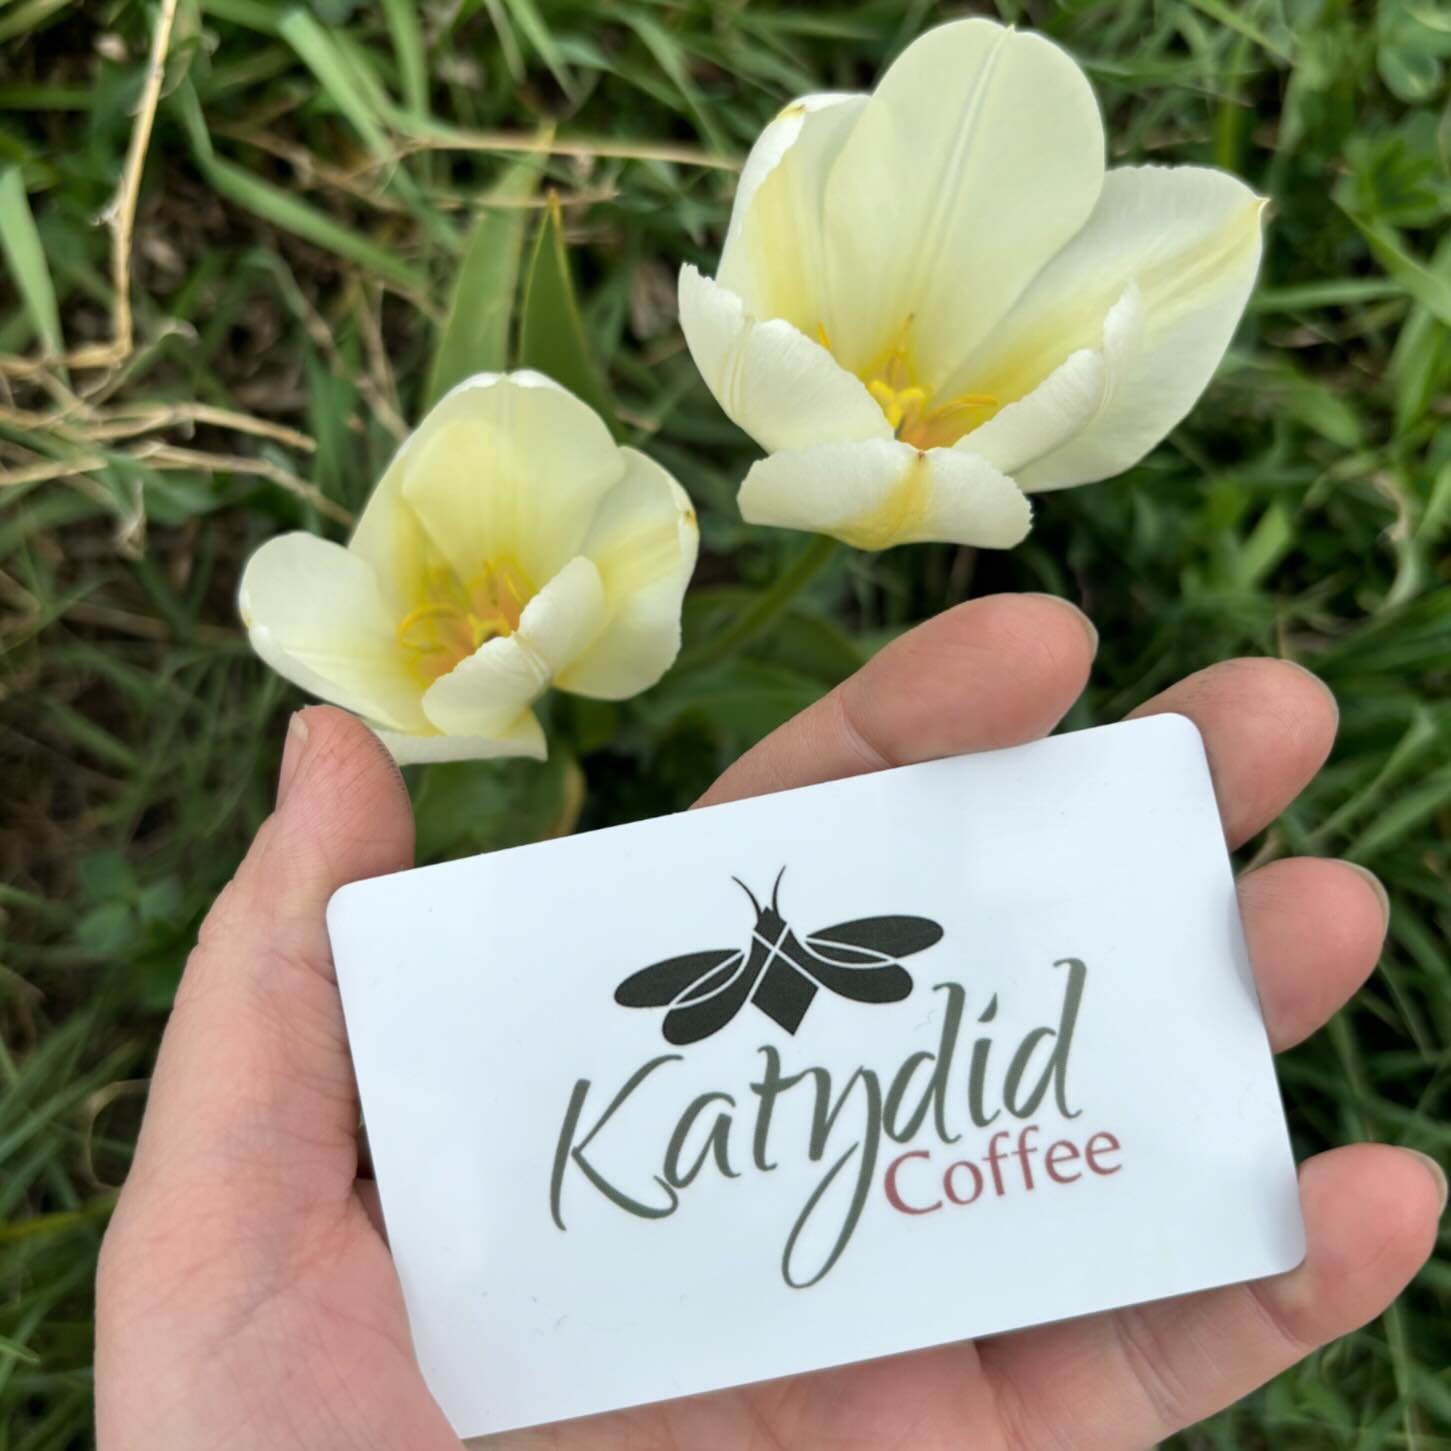 WE HAVE GIFT CARDS!! And just in time for Mother&rsquo;s Day! Has Mom had to bail you out once or twice? Tell her thank you with a cup of coffee the next time she&rsquo;s at the courthouse. 😉

Trust us, Mom will &lsquo;brief&rsquo;-ly become the jud